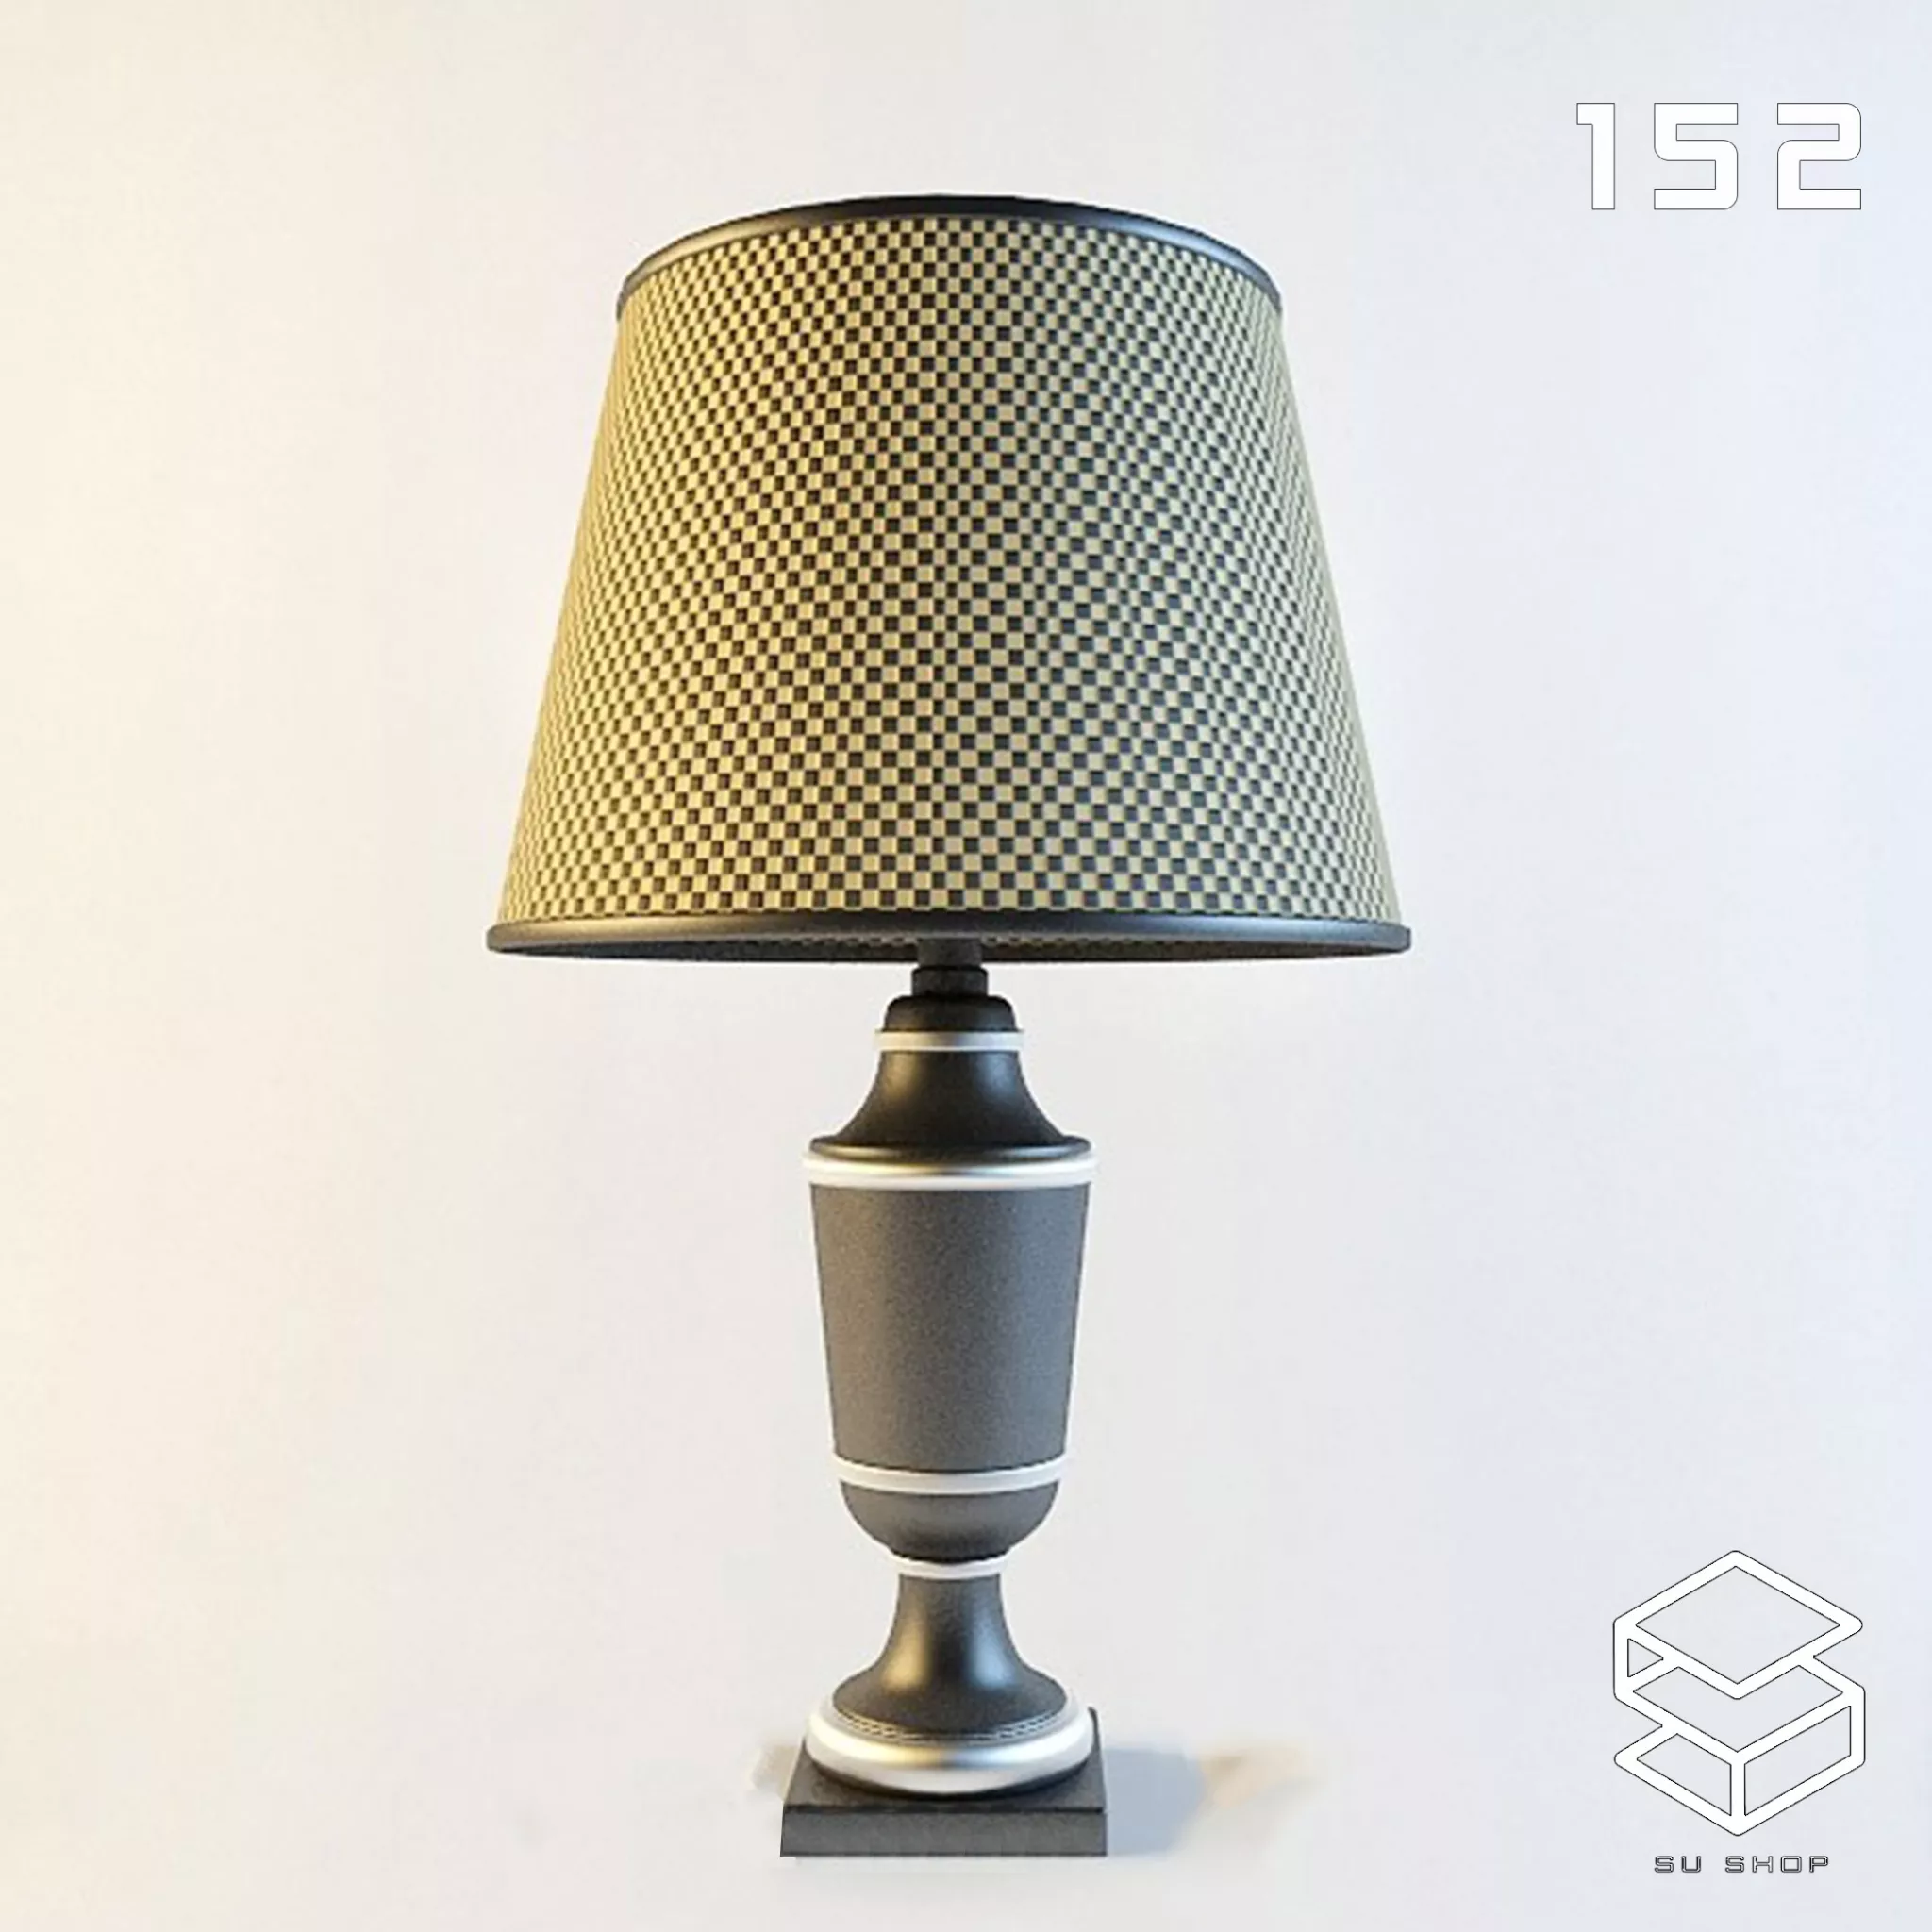 MODERN TABLE LAMP - SKETCHUP 3D MODEL - VRAY OR ENSCAPE - ID14722